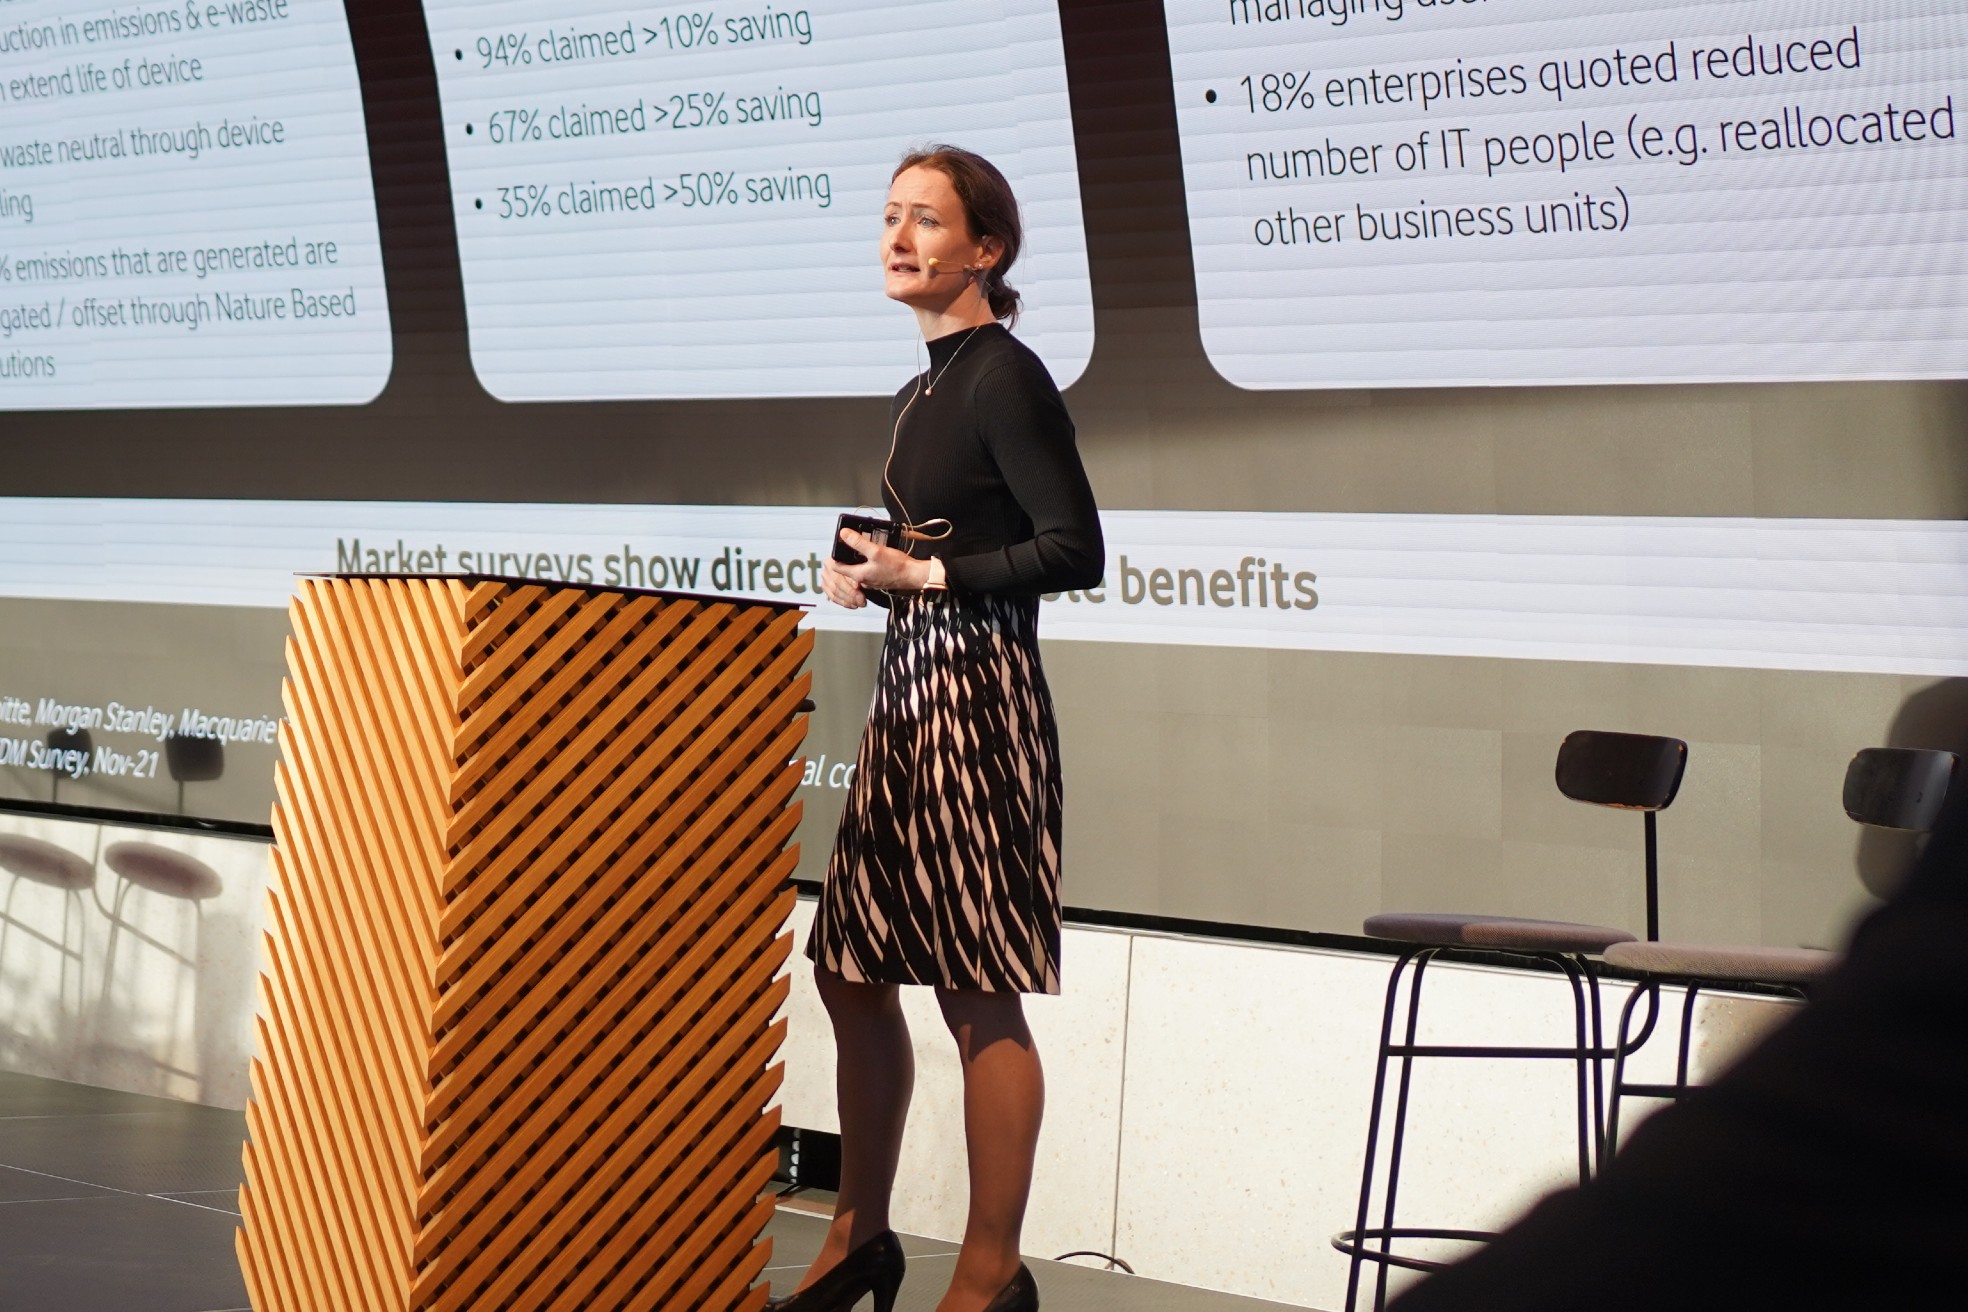 photo of Ceri Tinine, Senior Strategy Manager at Vodafone Business, speaking from a lectern to potential corporate customers at an event